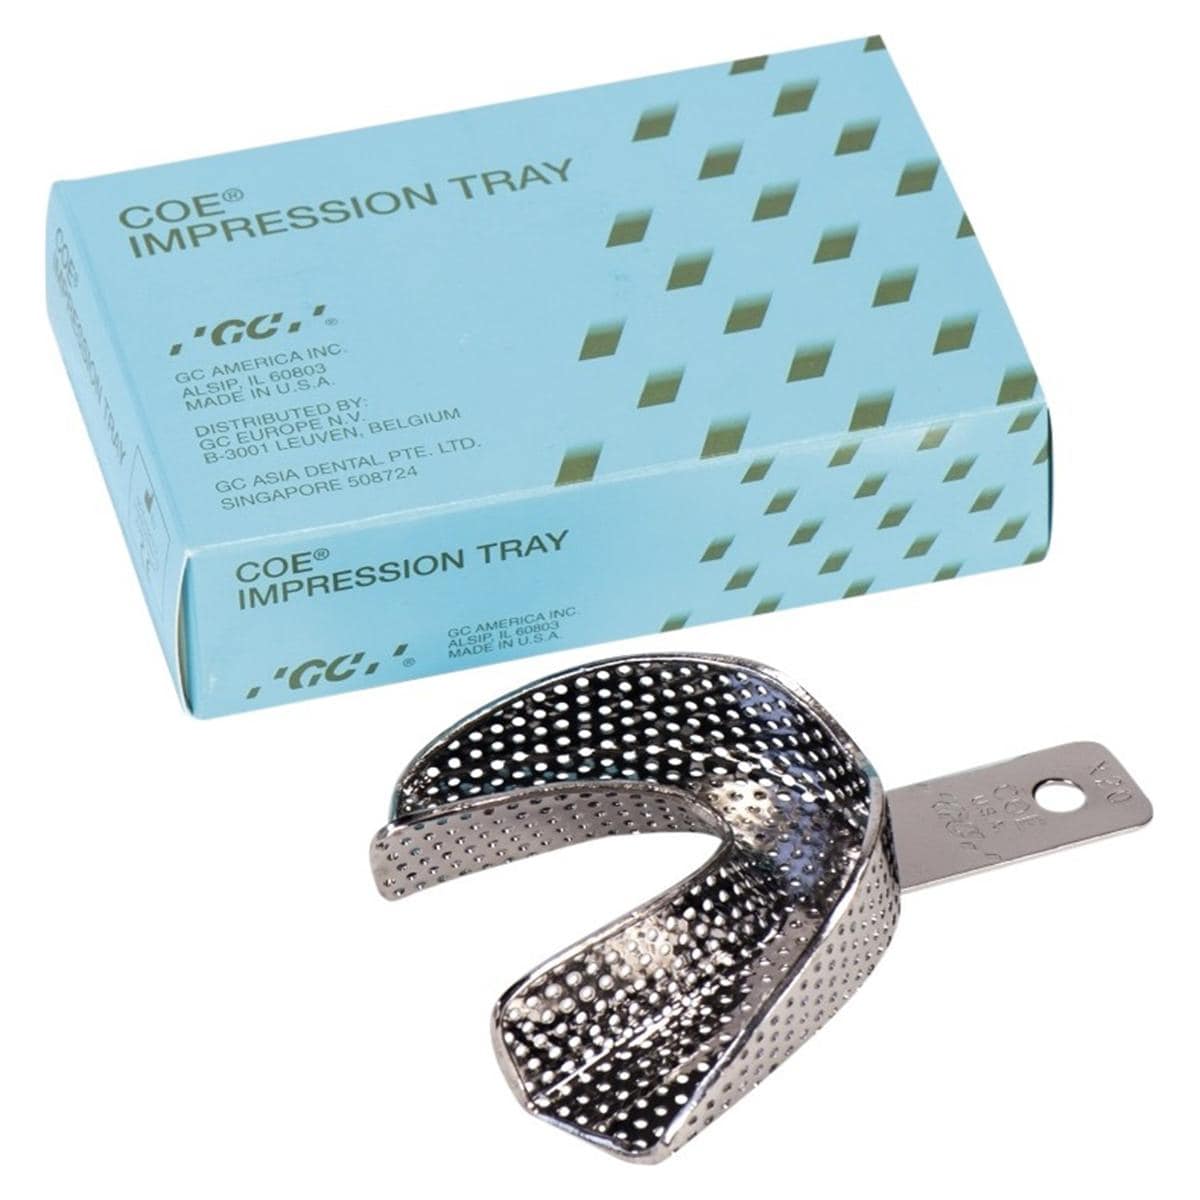 Coe Impression Trays, perfors - bas - 20 extra large